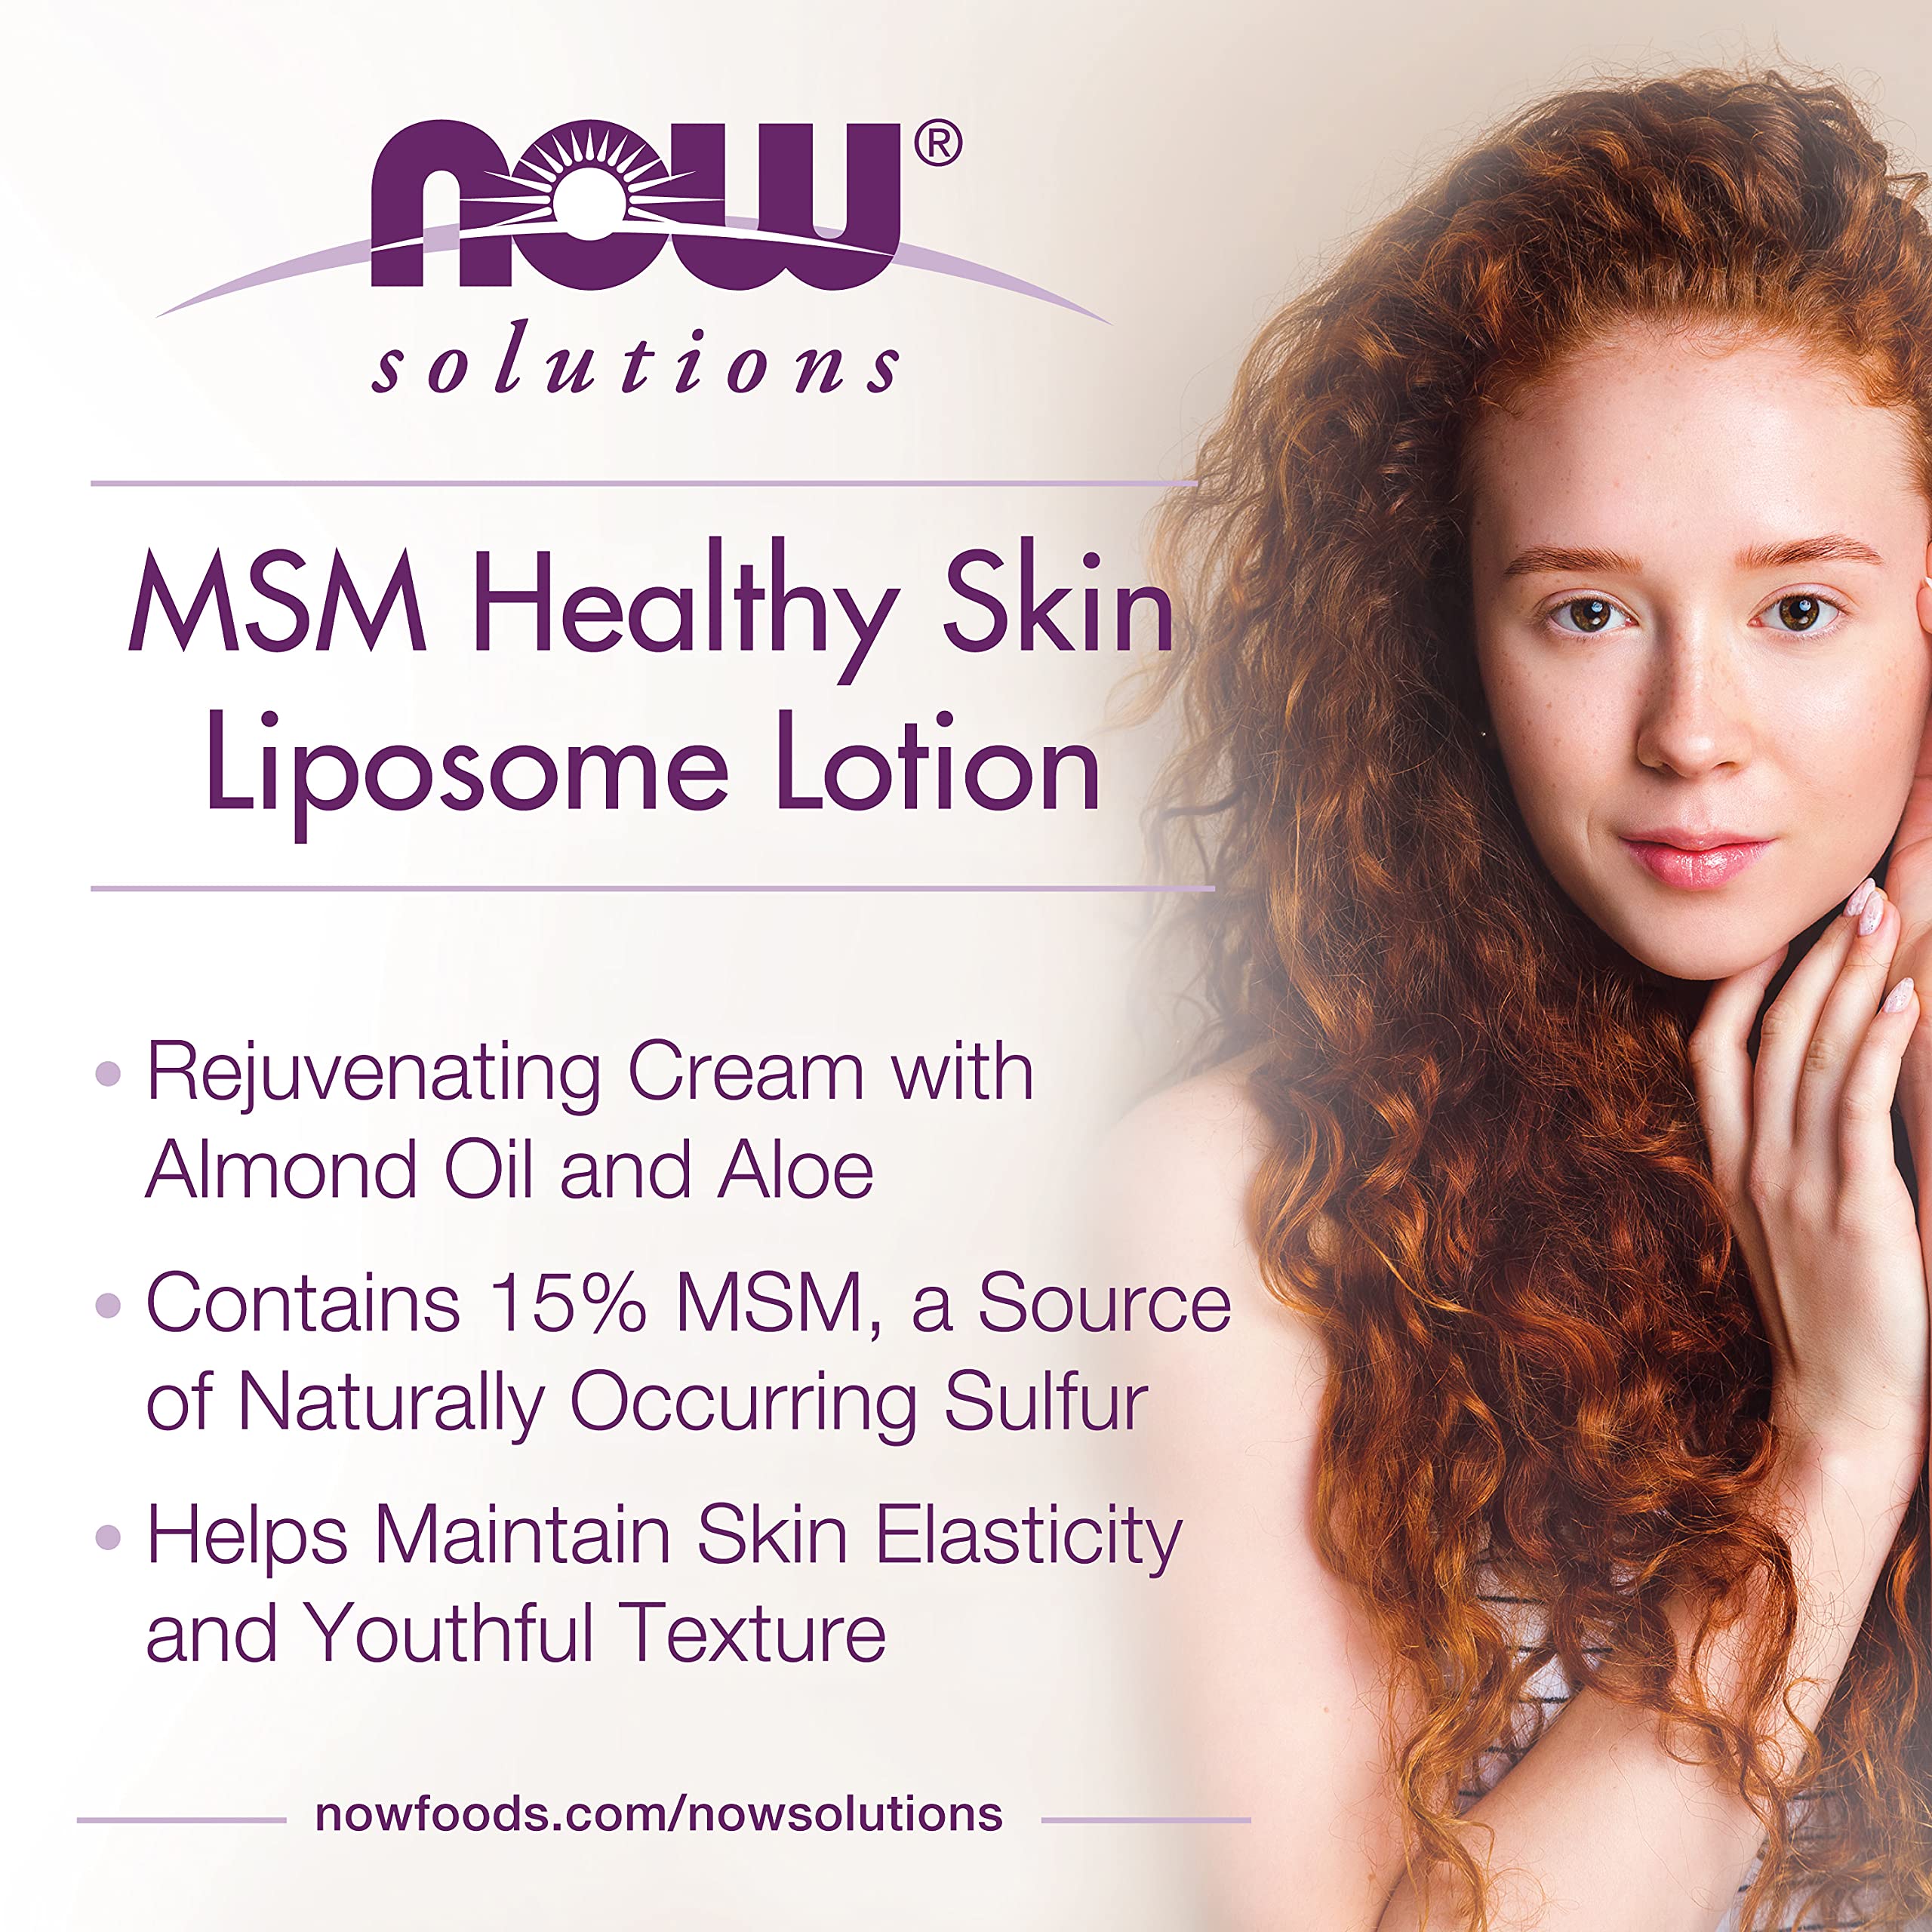 NOW Solutions, MSM Healthy Skin Liposome Lotion, Rejuvenating Cream with Almond Oil and Aloe, 8-Ounce